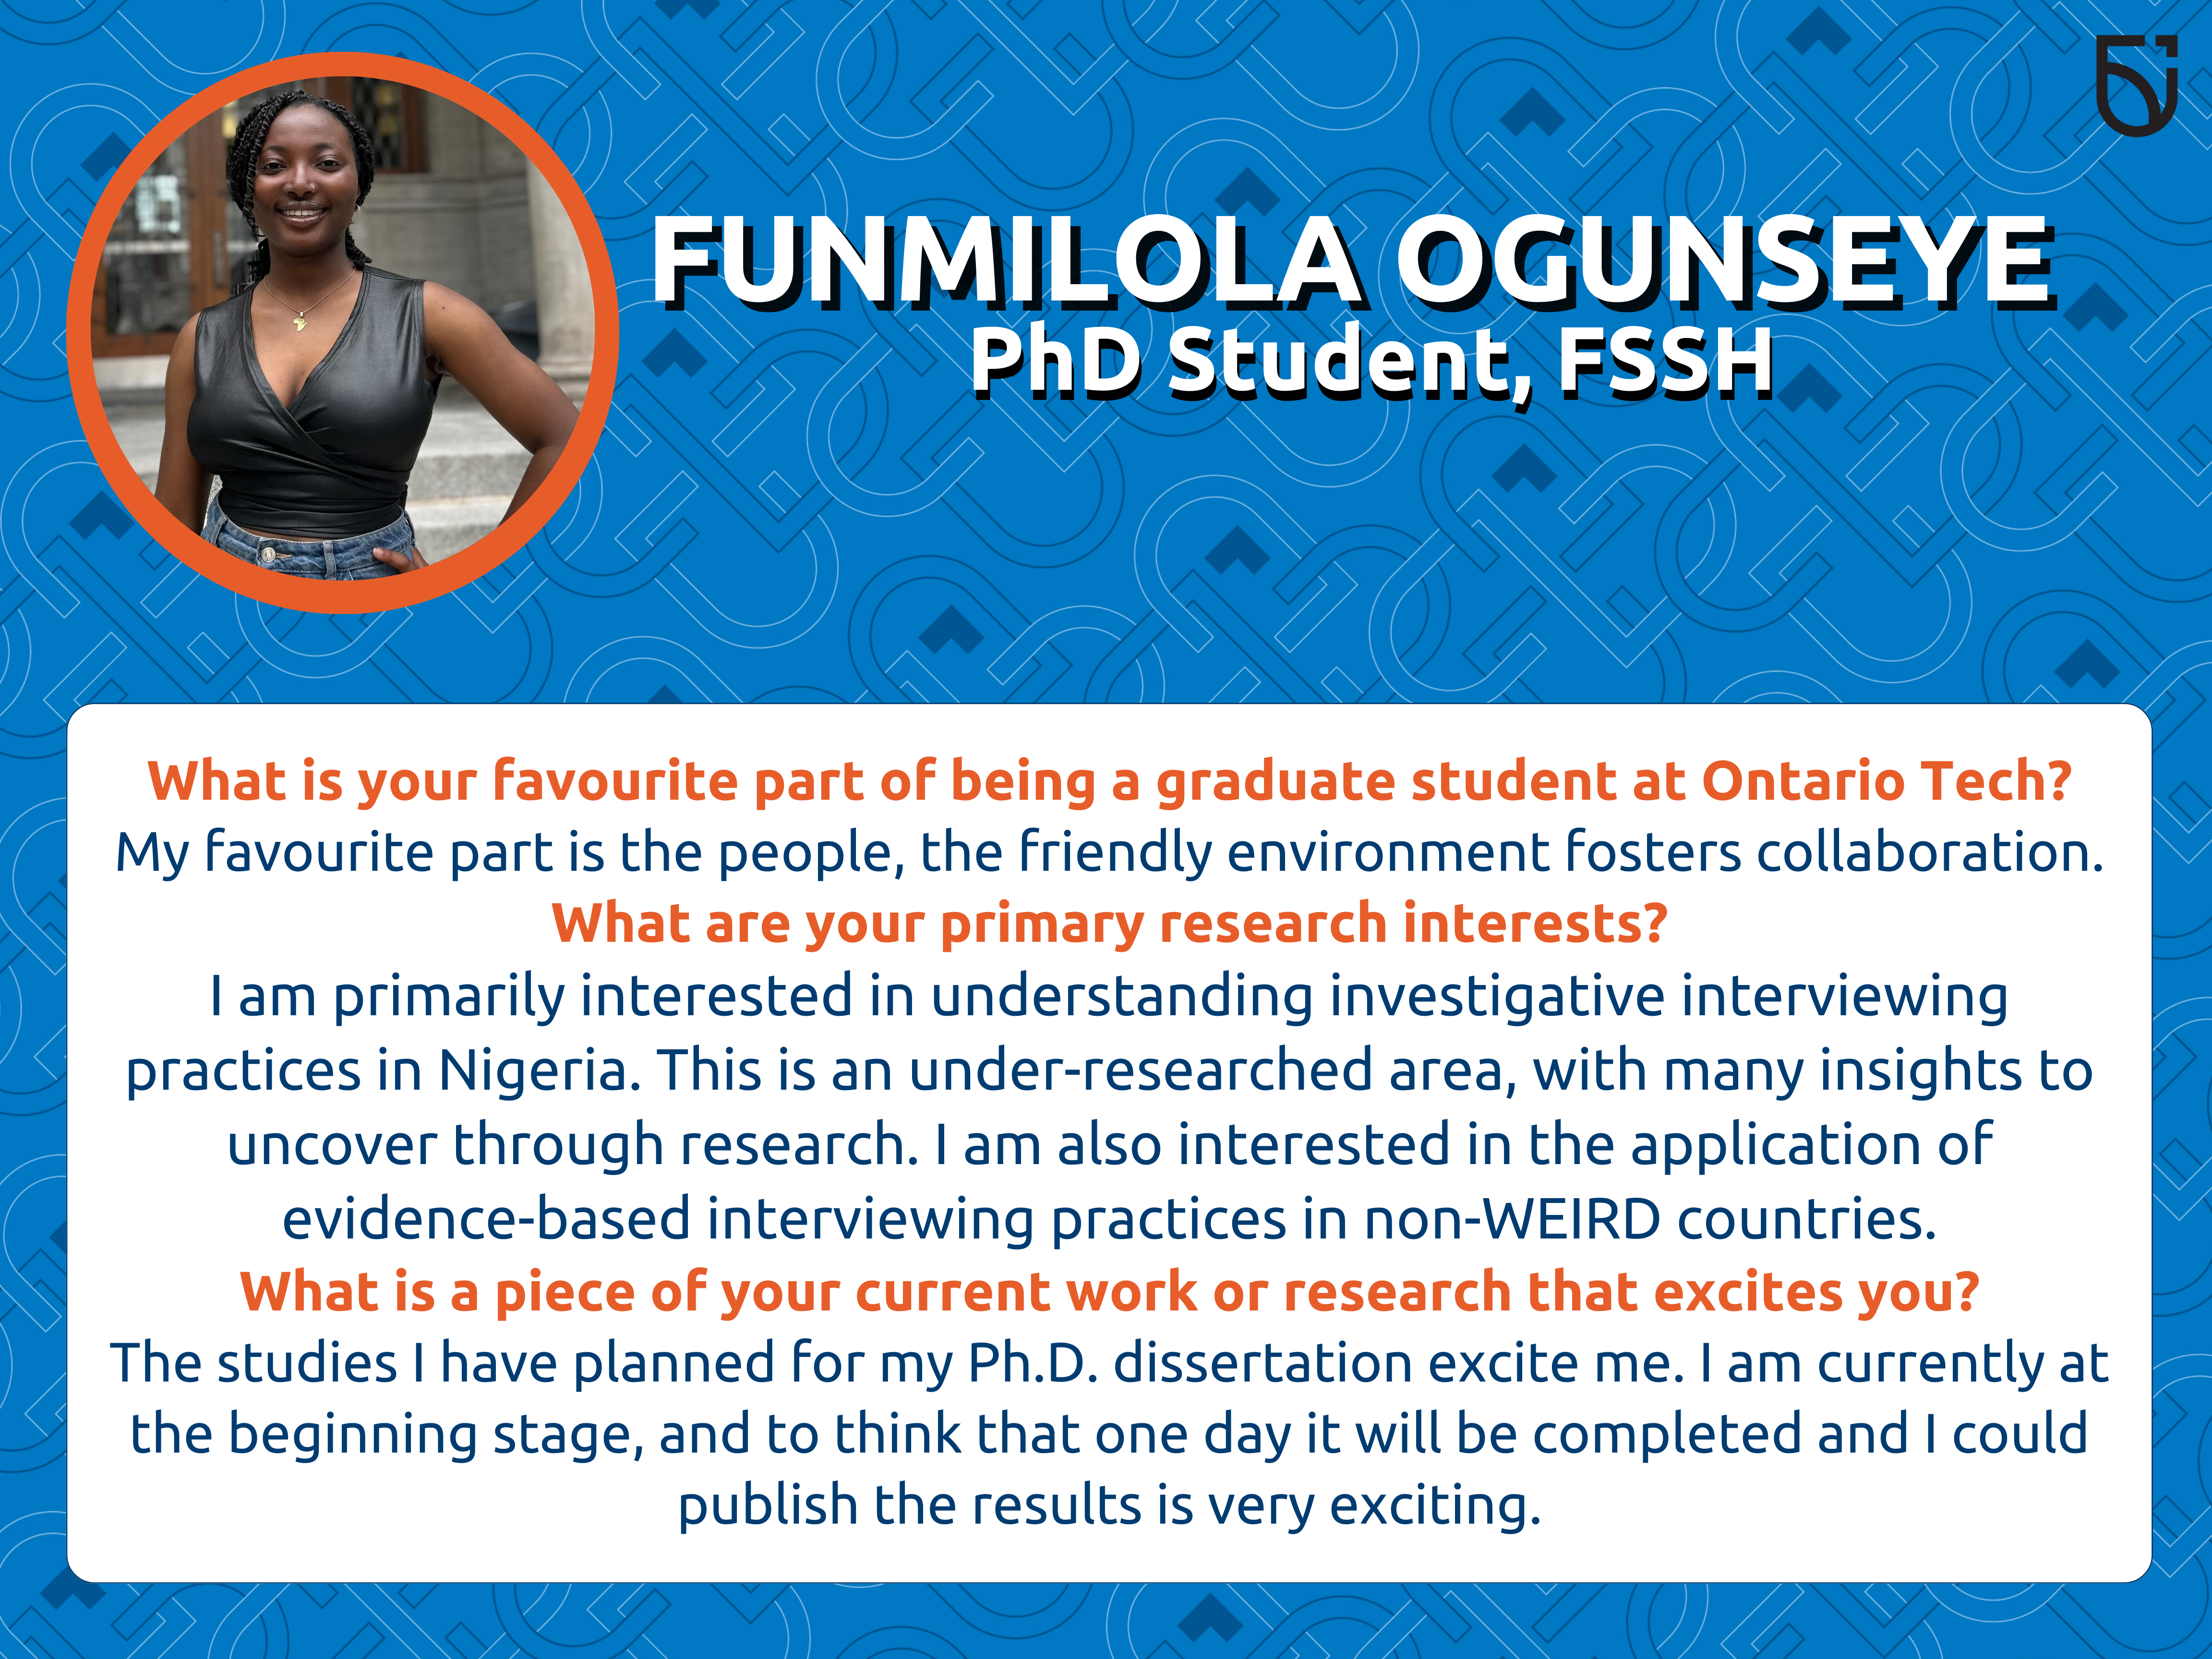 This photo is a Women’s Wednesday feature of Funmilola Ogunseye, a PhD Student in the Faculty of Social Science and Humanities